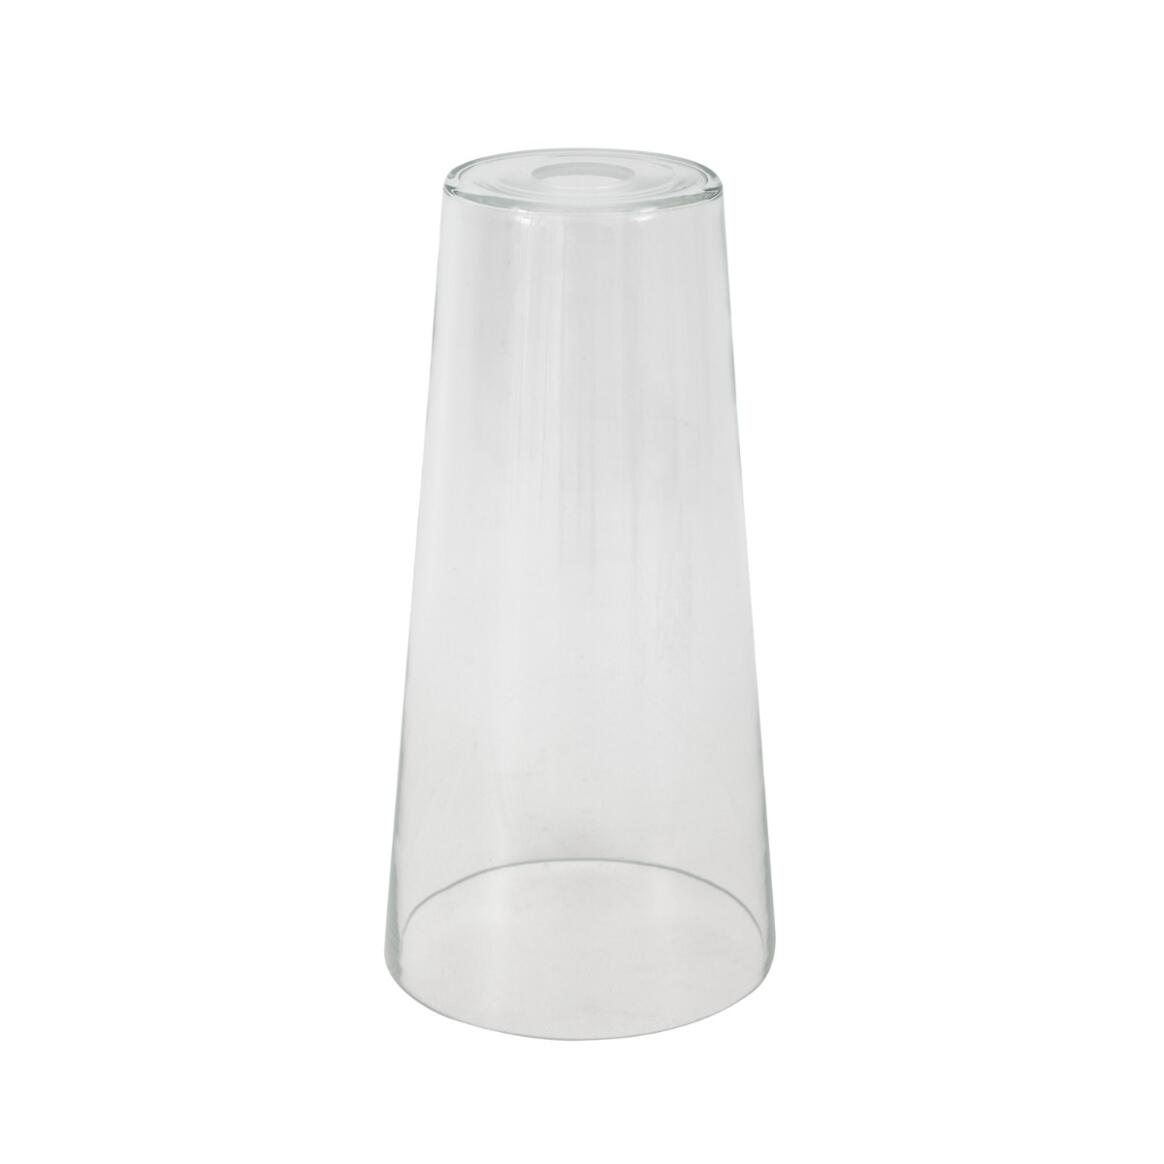 Tall cone clear glass lamp shade 6.9" main product image